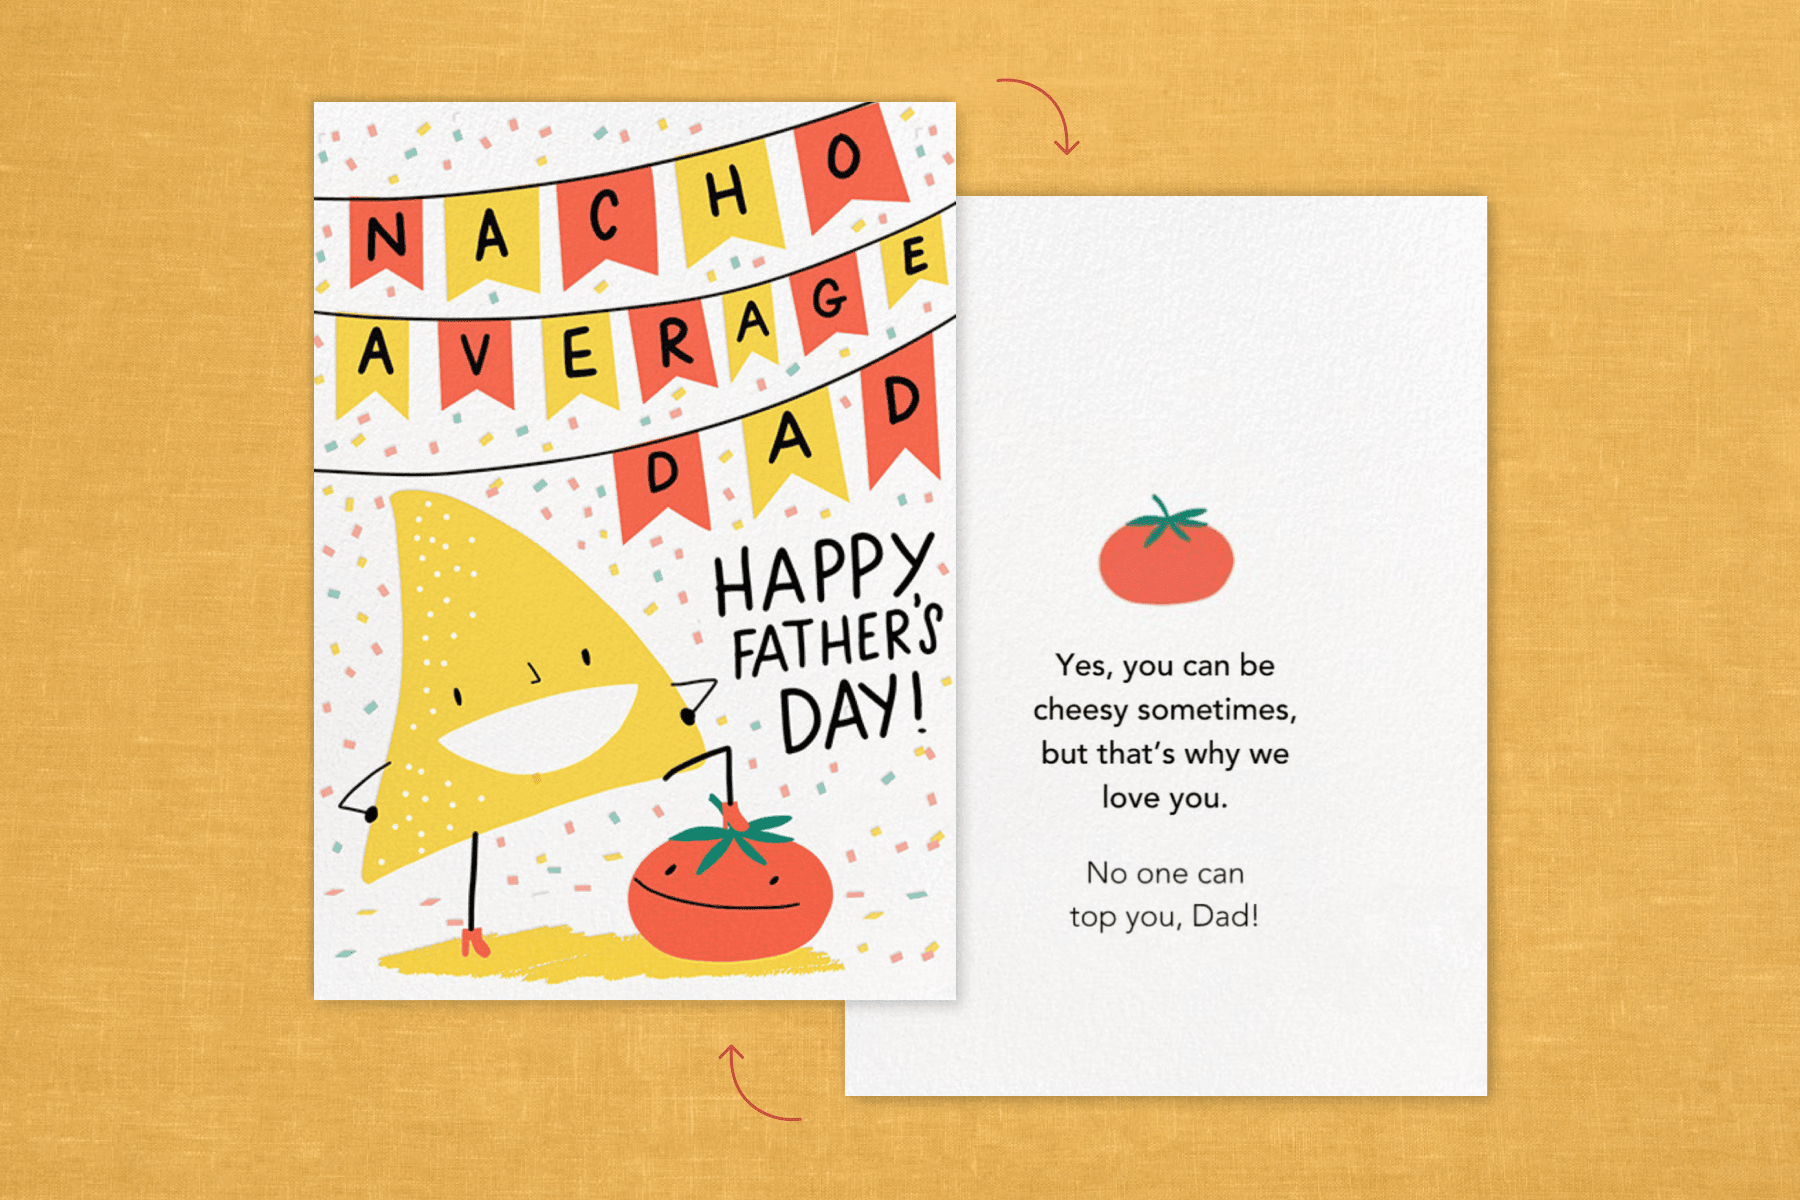 A Father’s Day card featuring an illustration of a chip and tomato with the words “Nacho Average Dad” in bunting and the words “Happy Father’s Day!” below. The back of the card is also shown with a sample message also listed in the suggestions below.